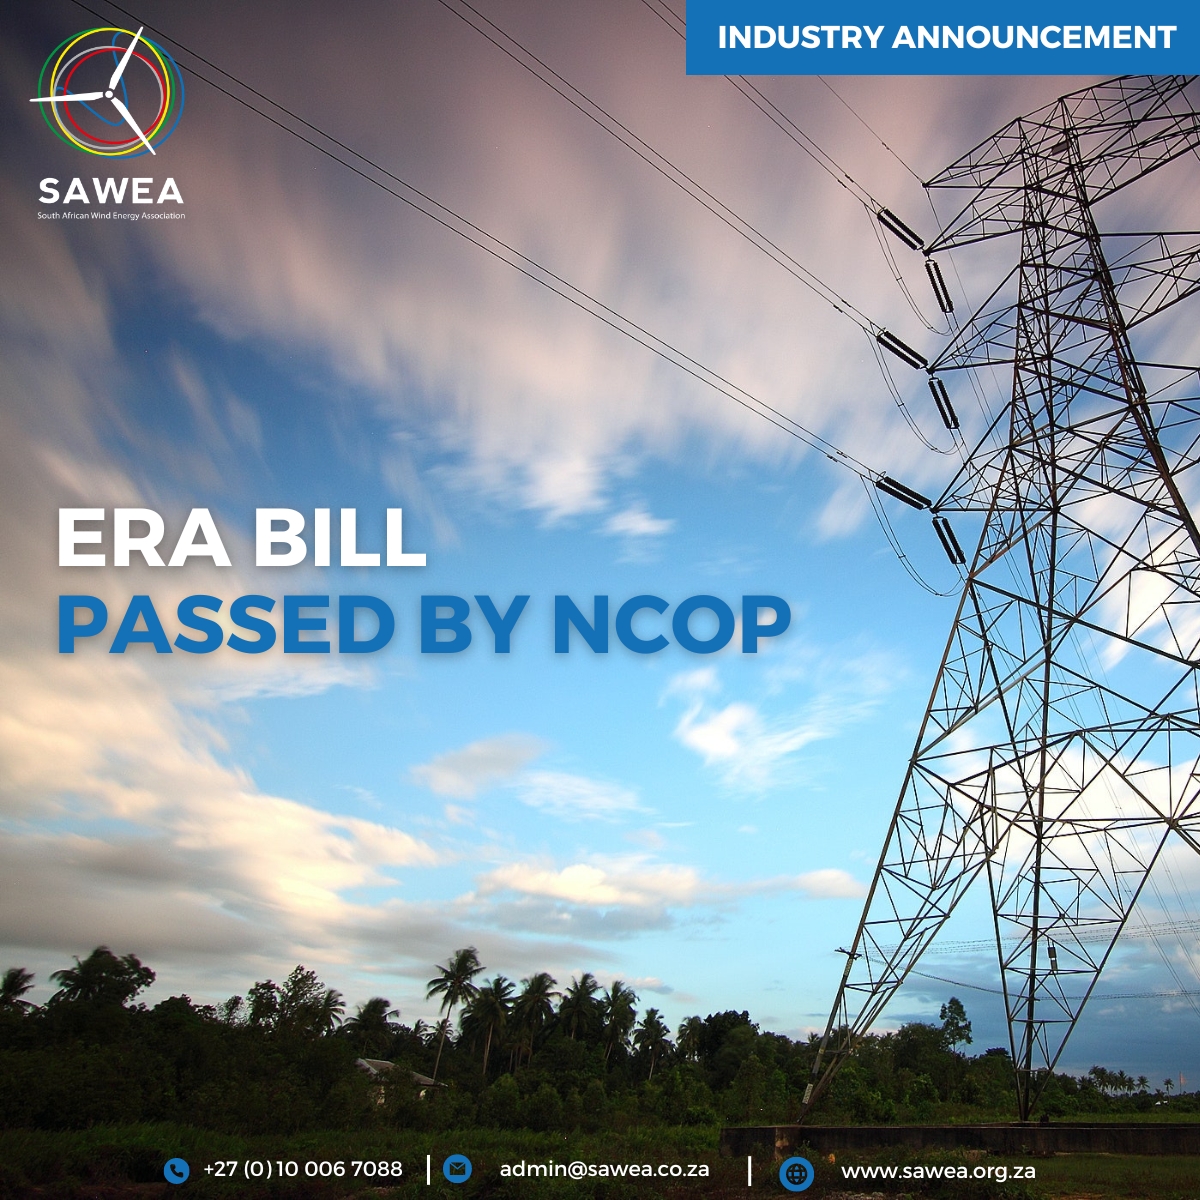 ERA BILL UPDATE: #SAWEA applauds the NCOP approval of the #ERABill - a significant milestone for the #RE industry, particularly @windenergy. We eagerly anticipate the President’s consideration in shaping our energy landscape, for generations to come. #windresilience